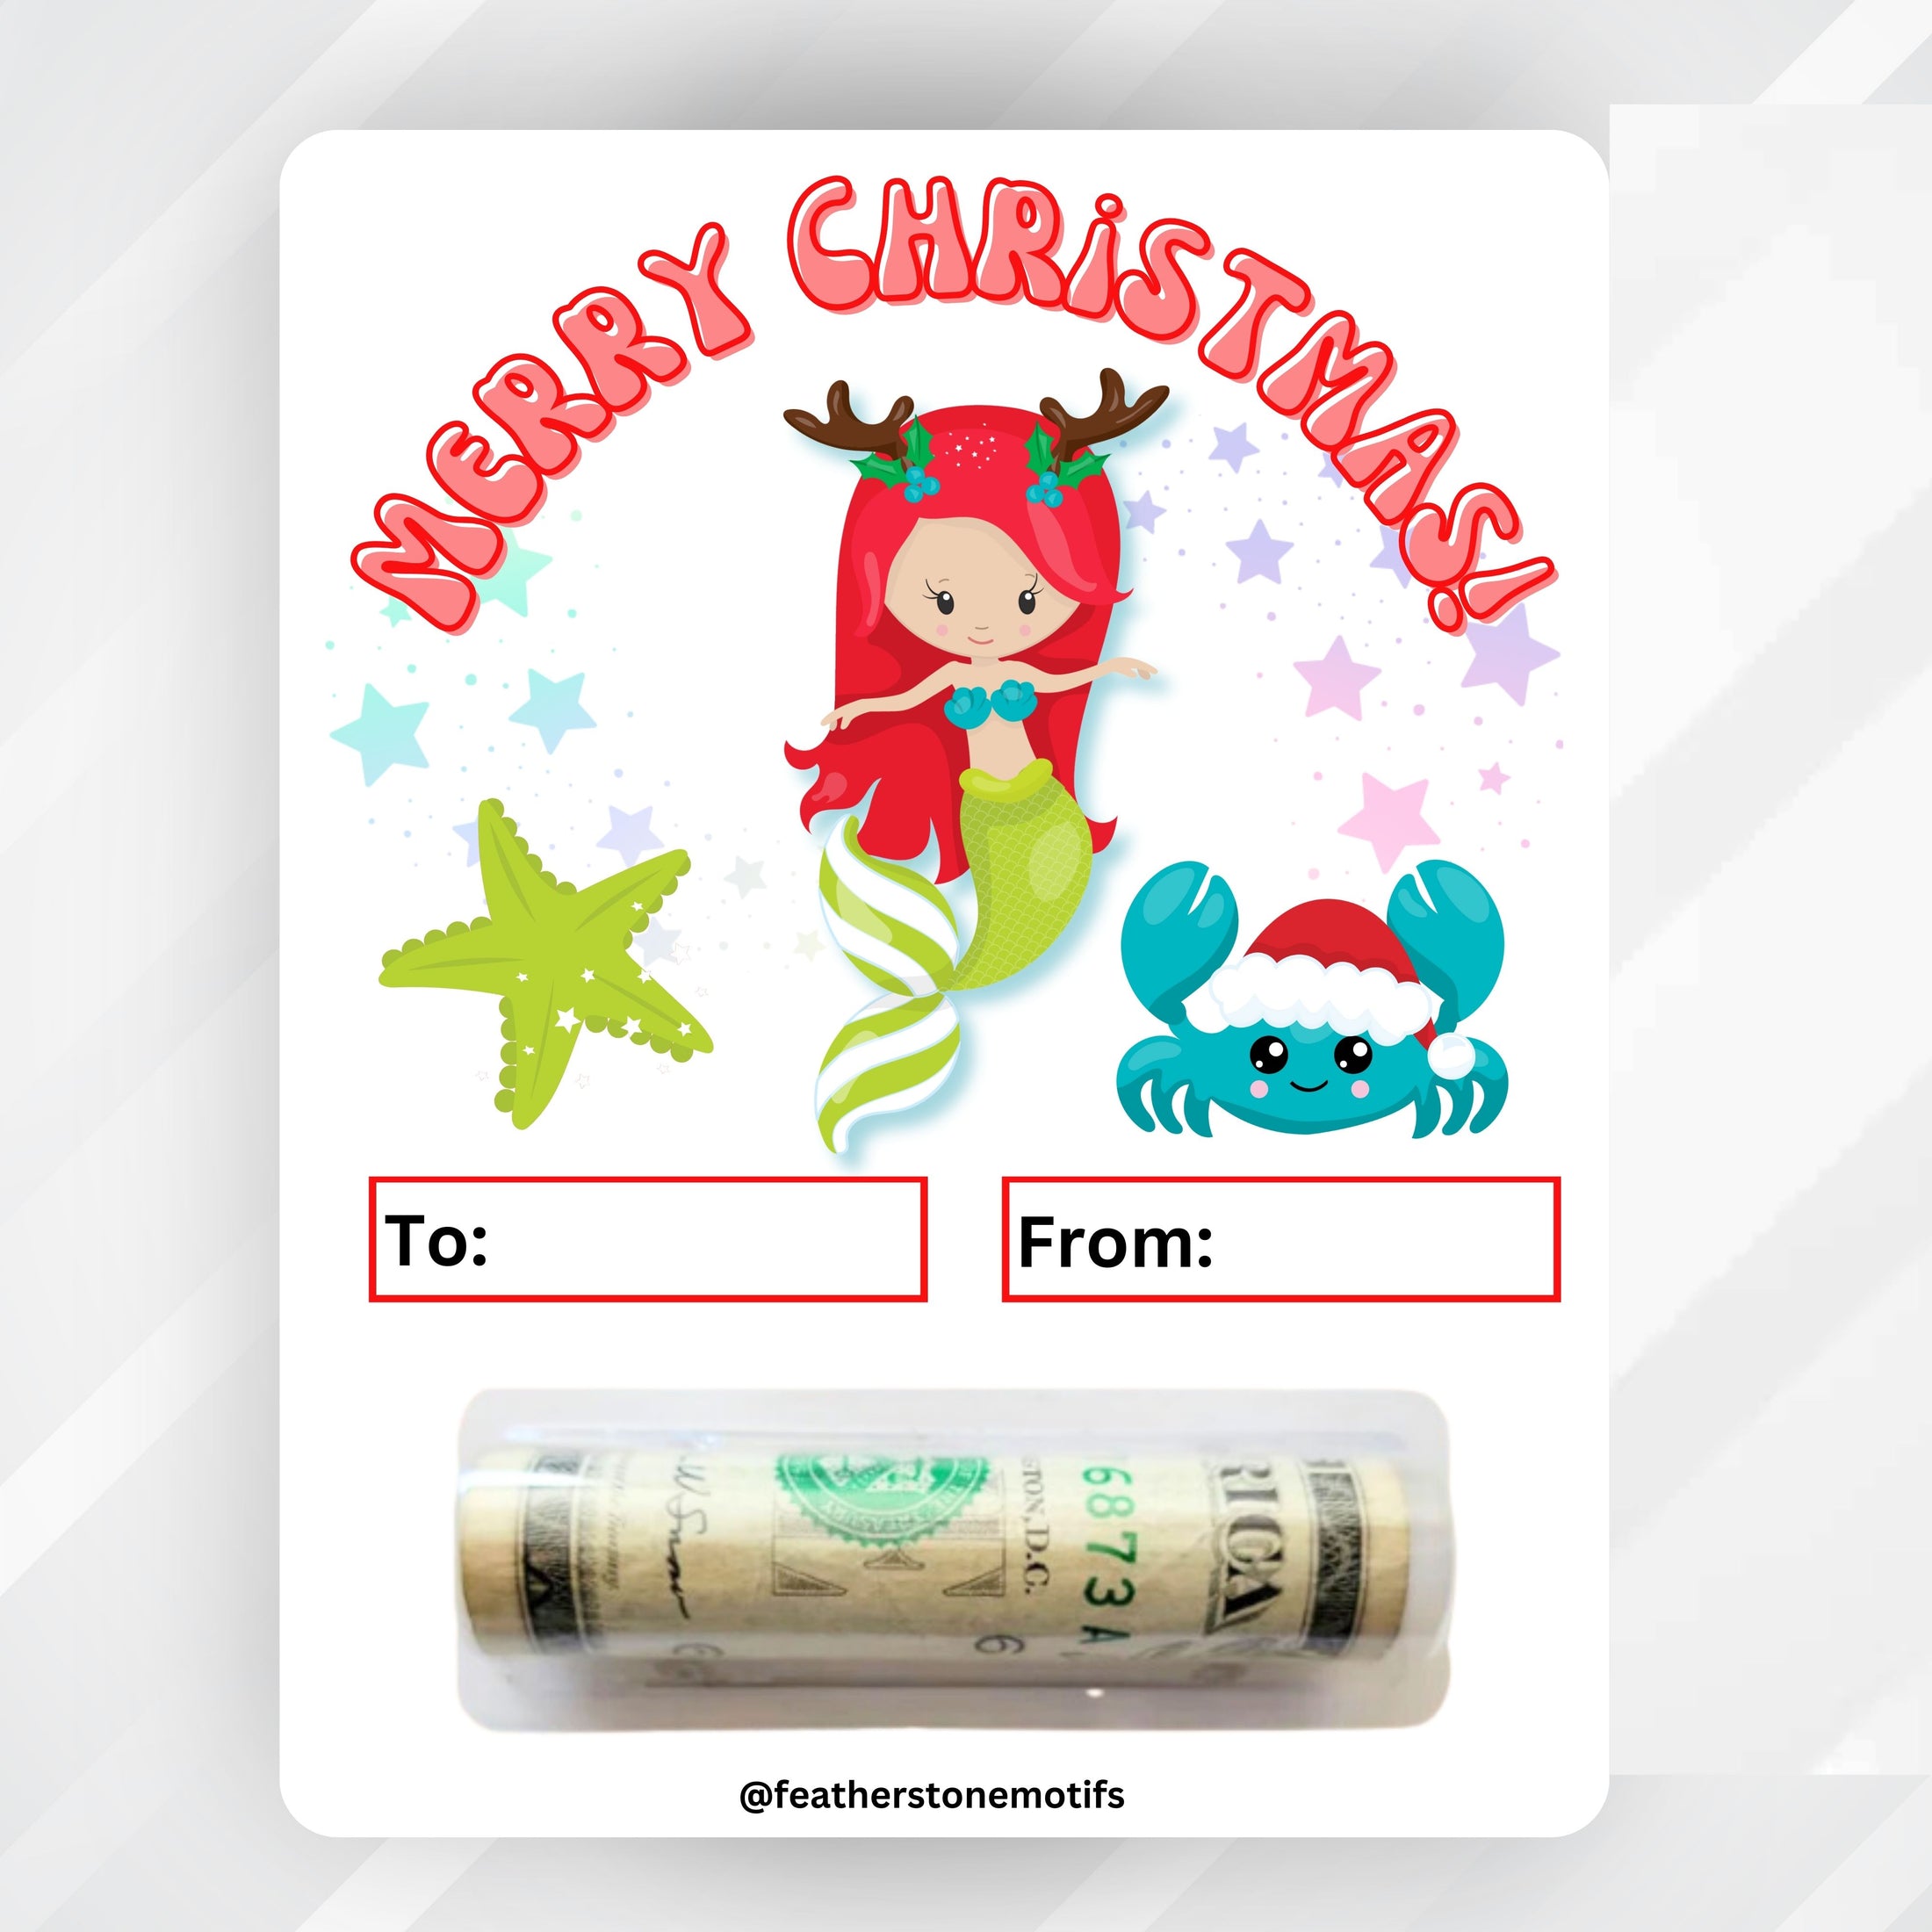 This image shows the money tube attached to the Mermaid money card.